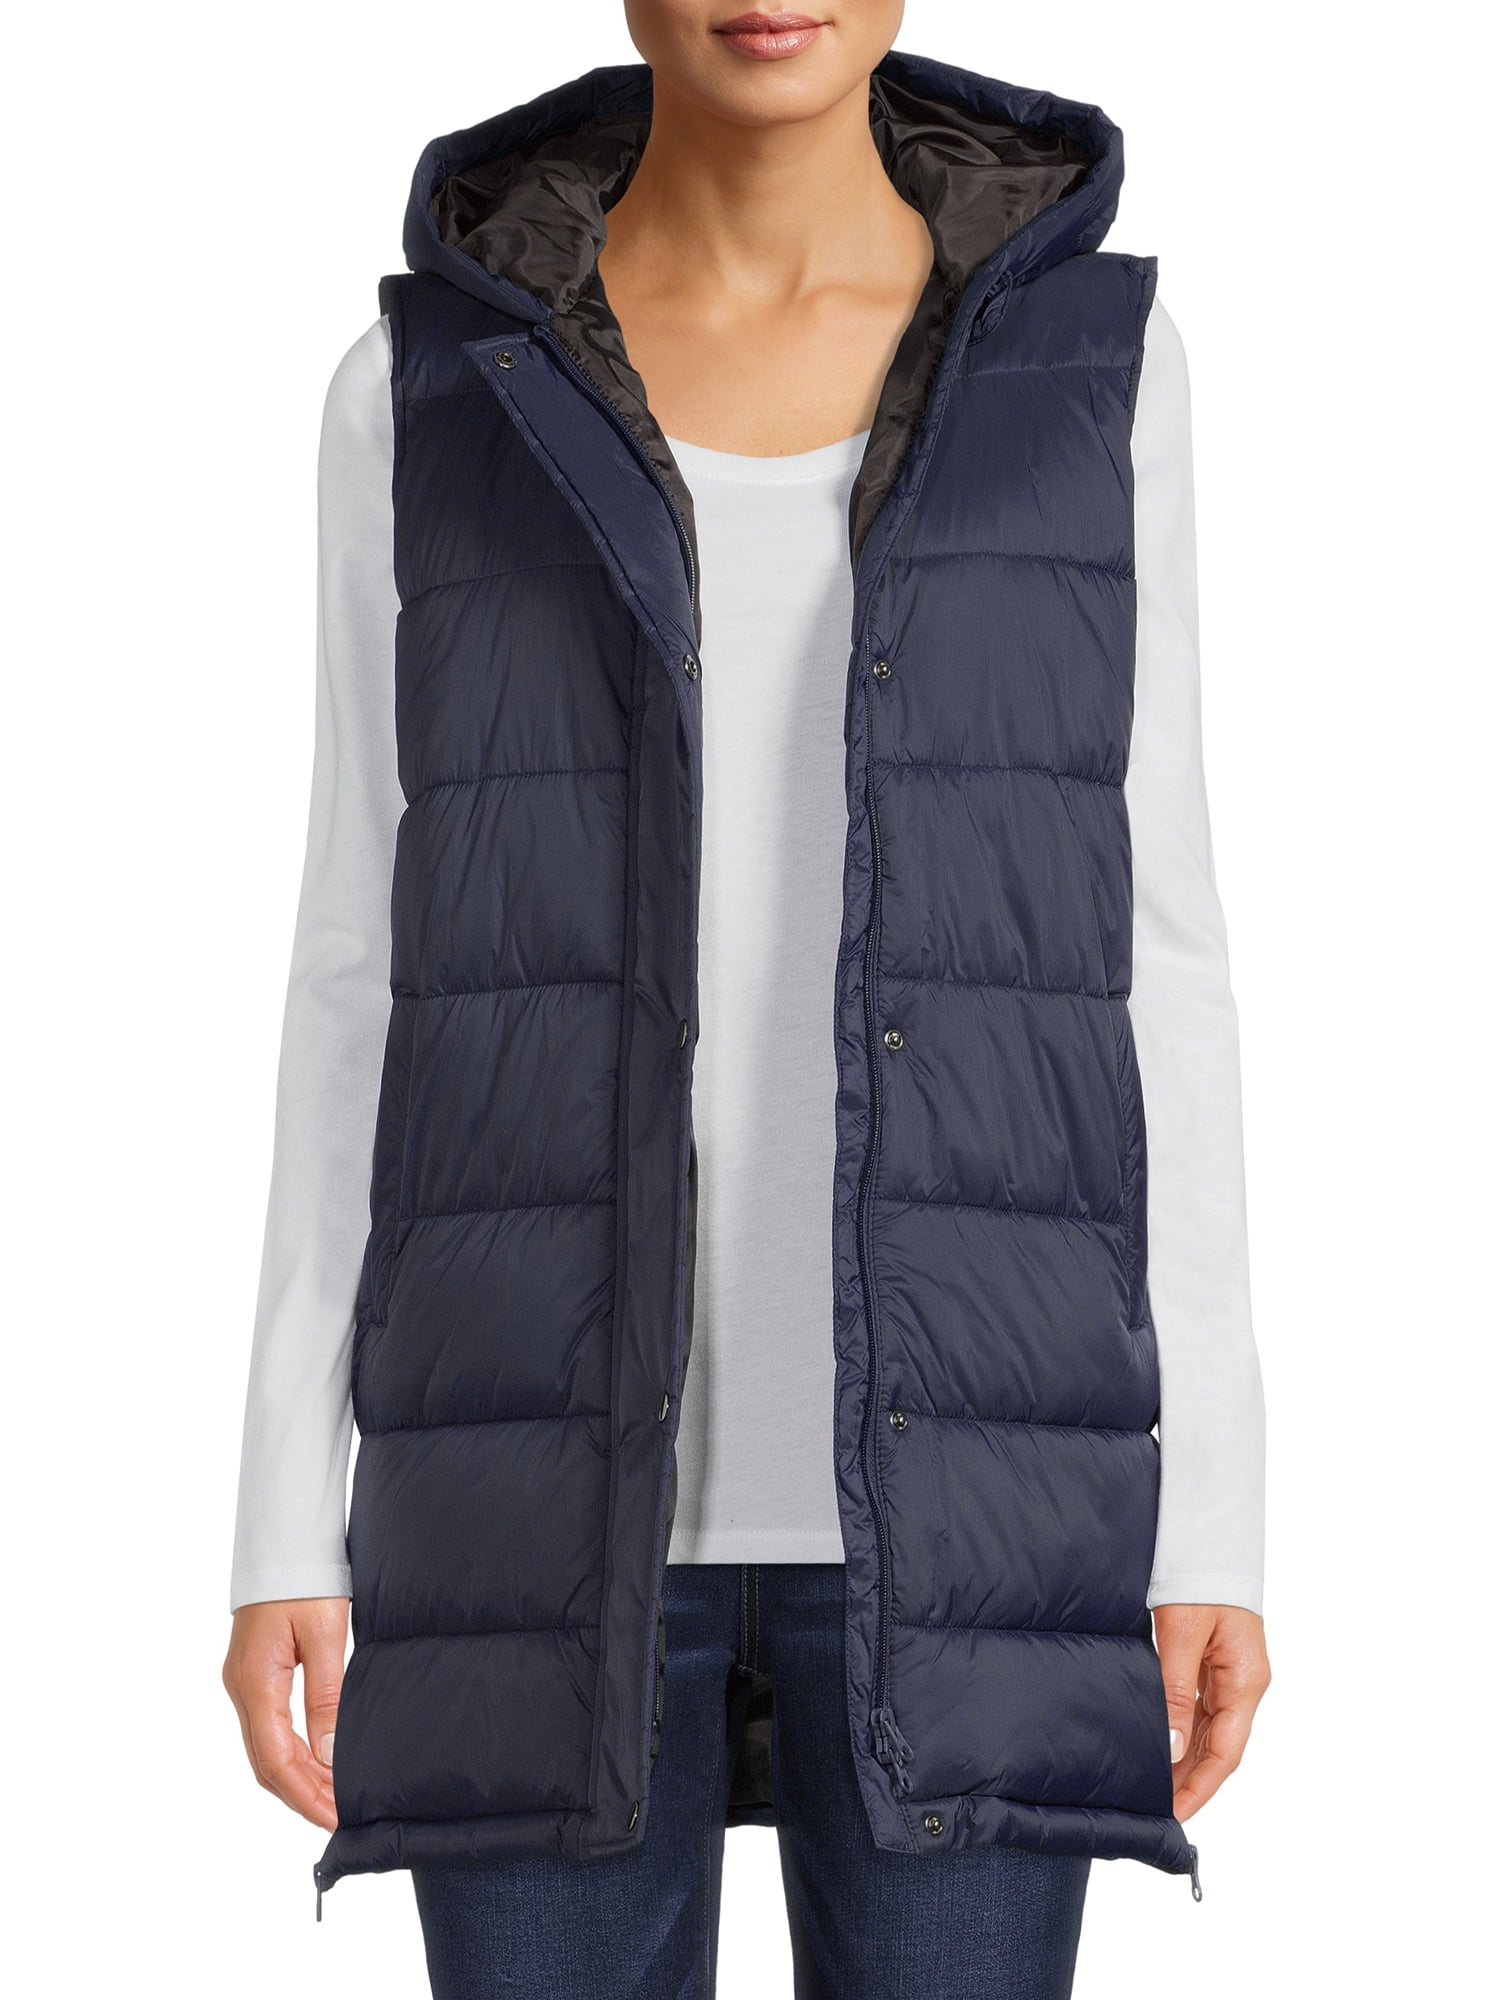 Swiss Tech Women's and Plus Hooded Tunic Vest